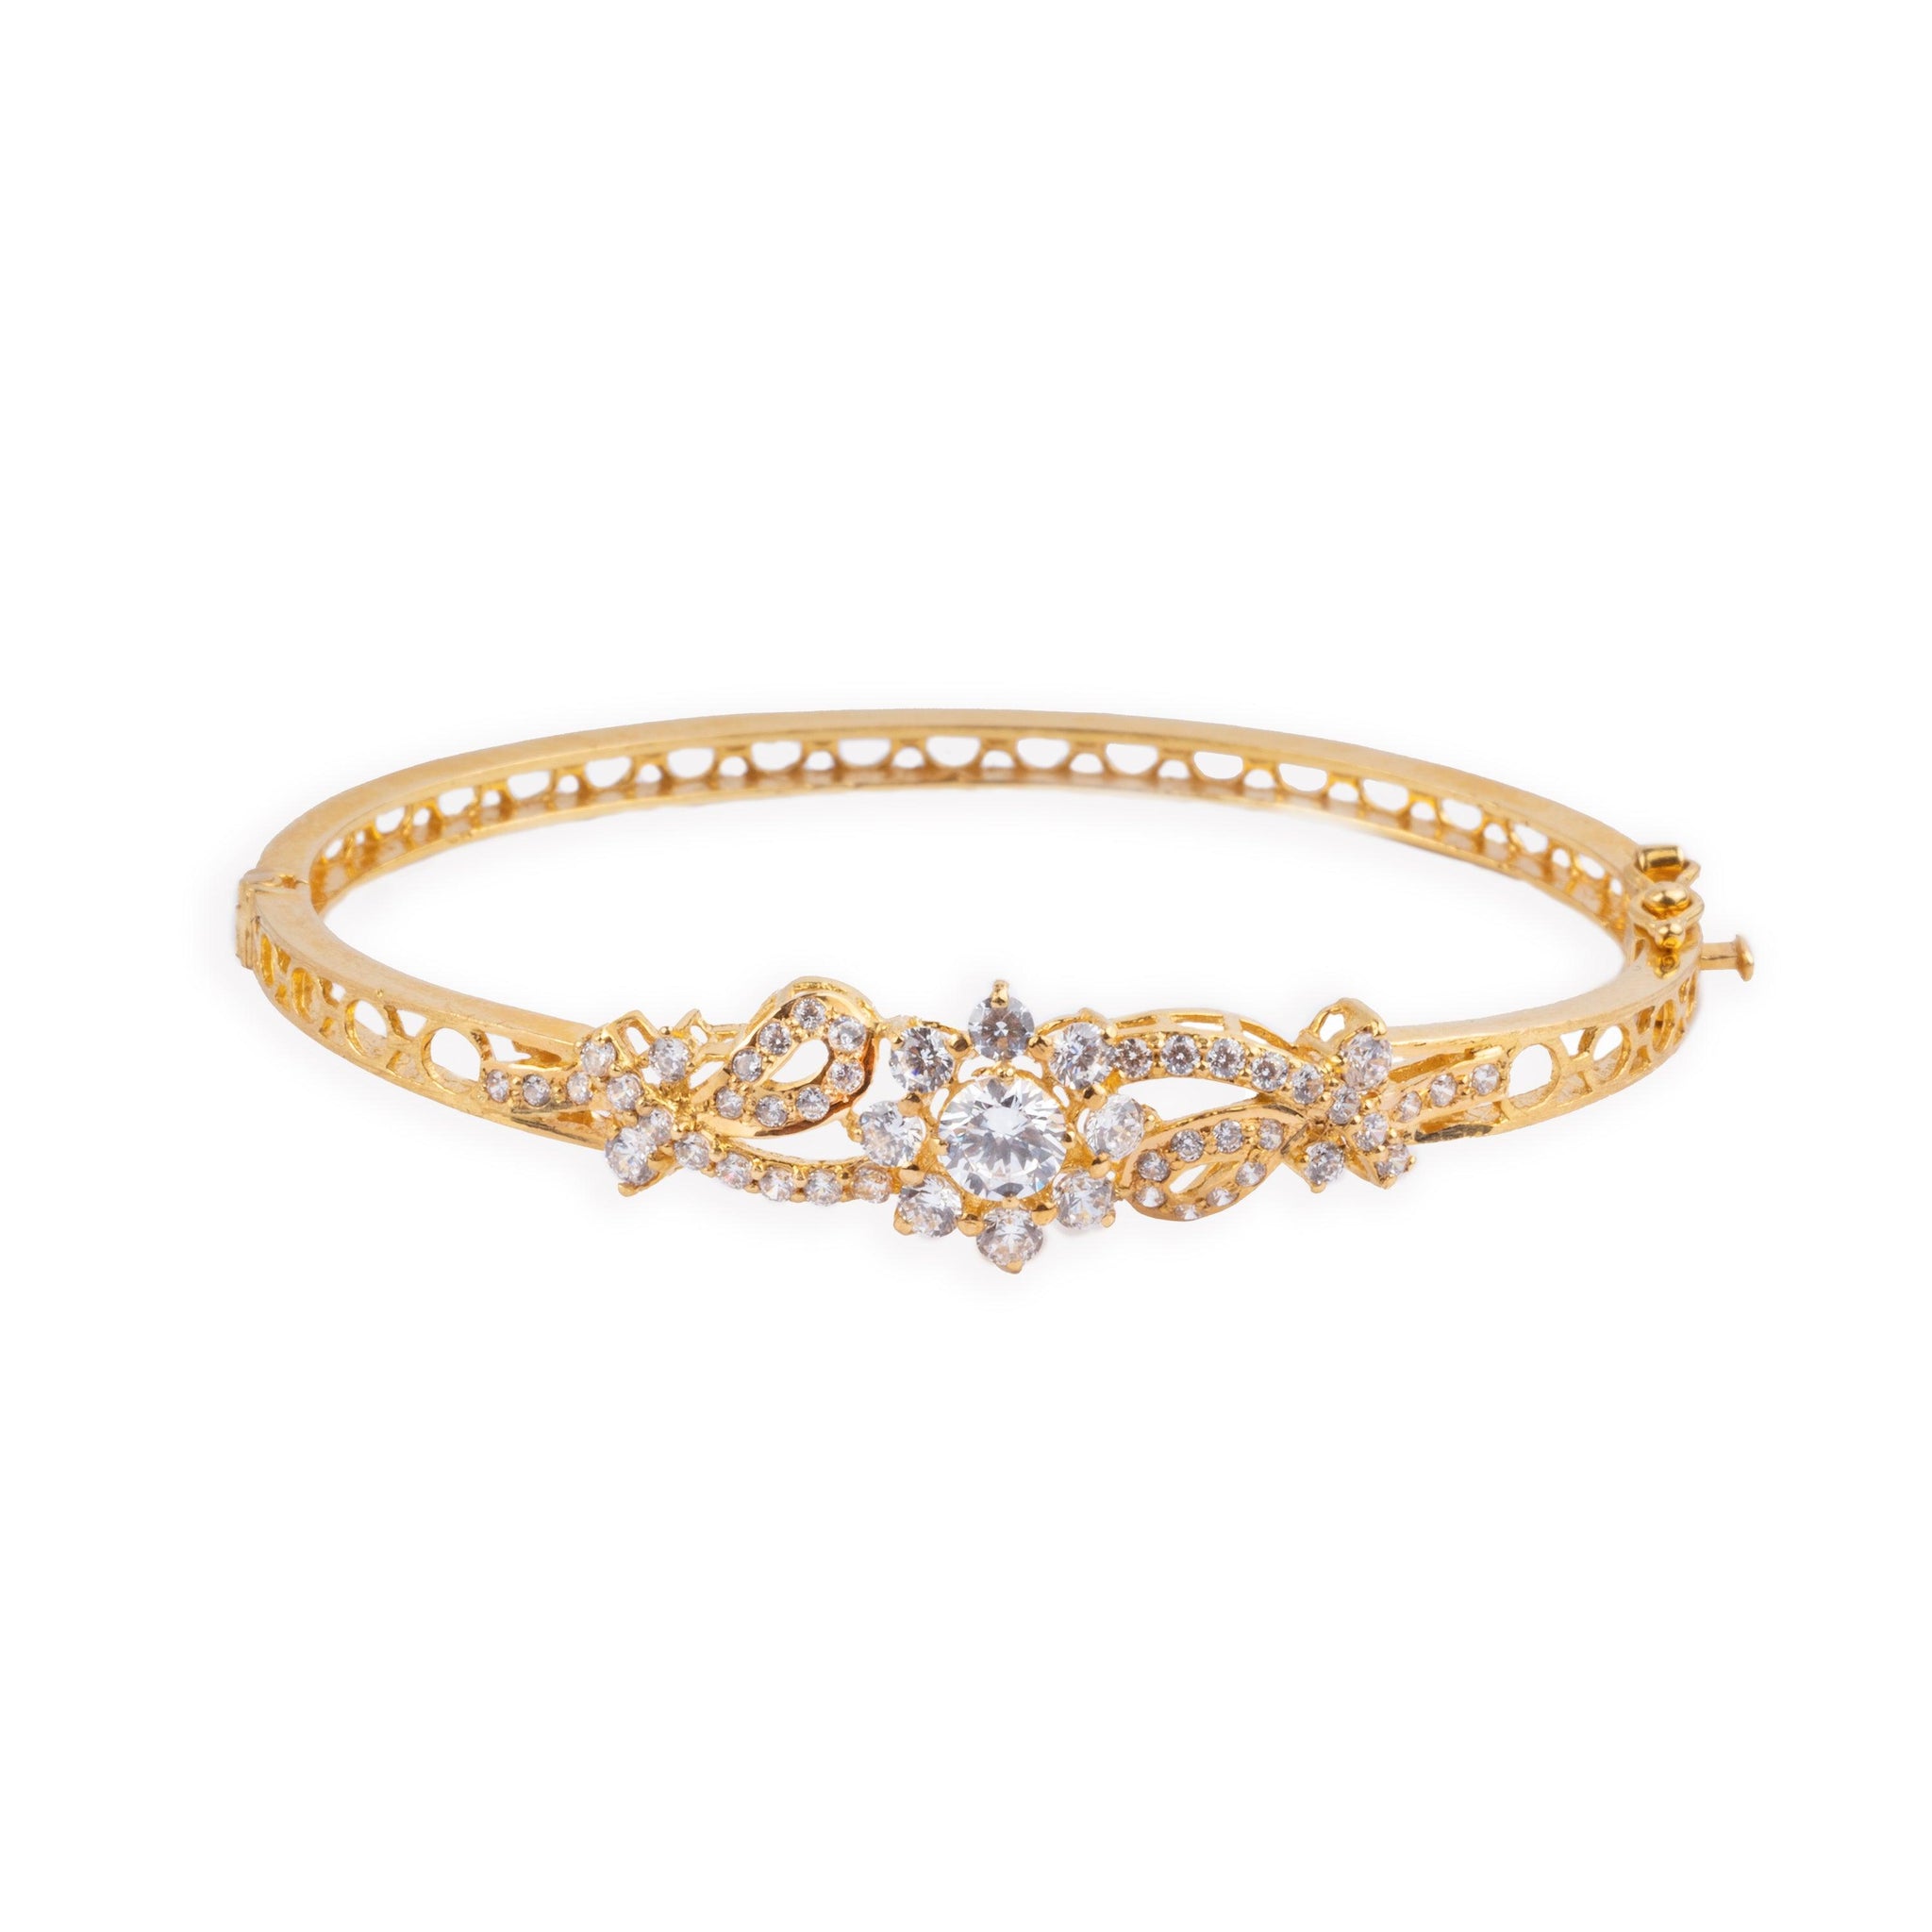 22ct Gold Openable Bangle set with Cubic Zirconias B-8086